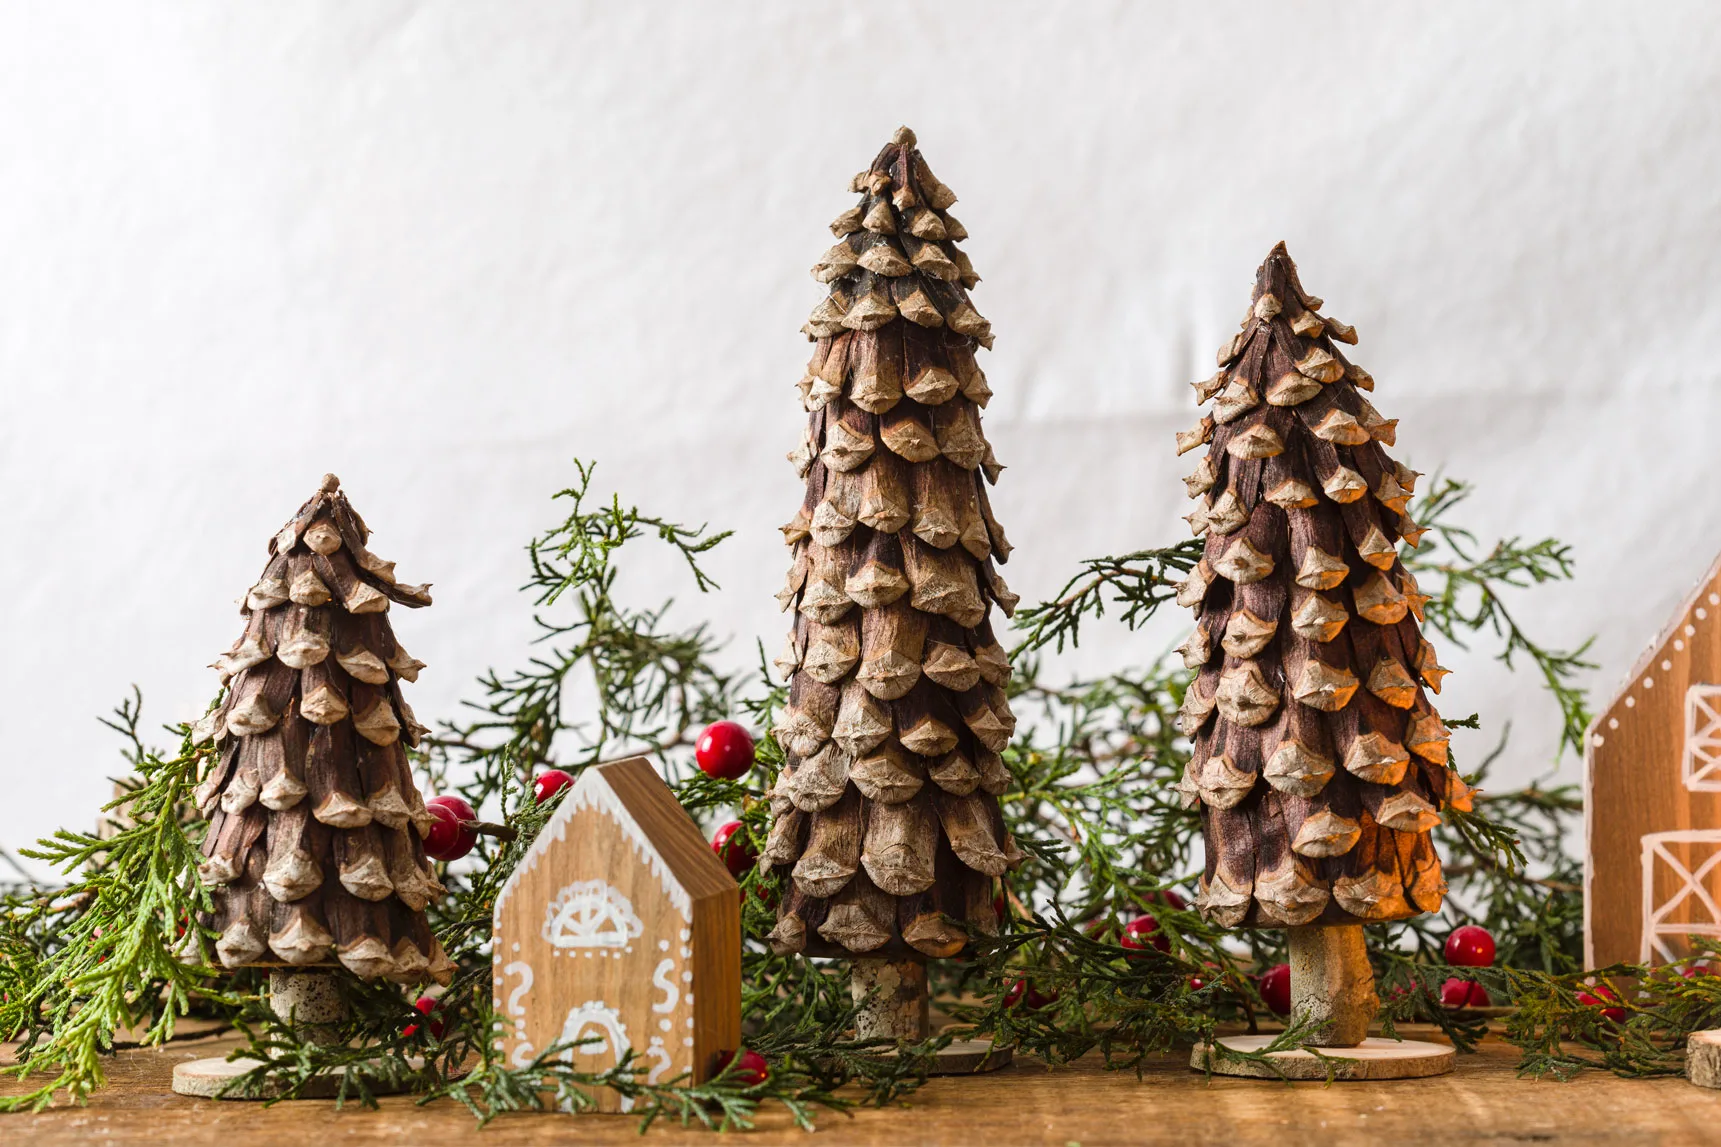 PIne Cone Christmas Trees on the wood table with DIY wood houses and cedar